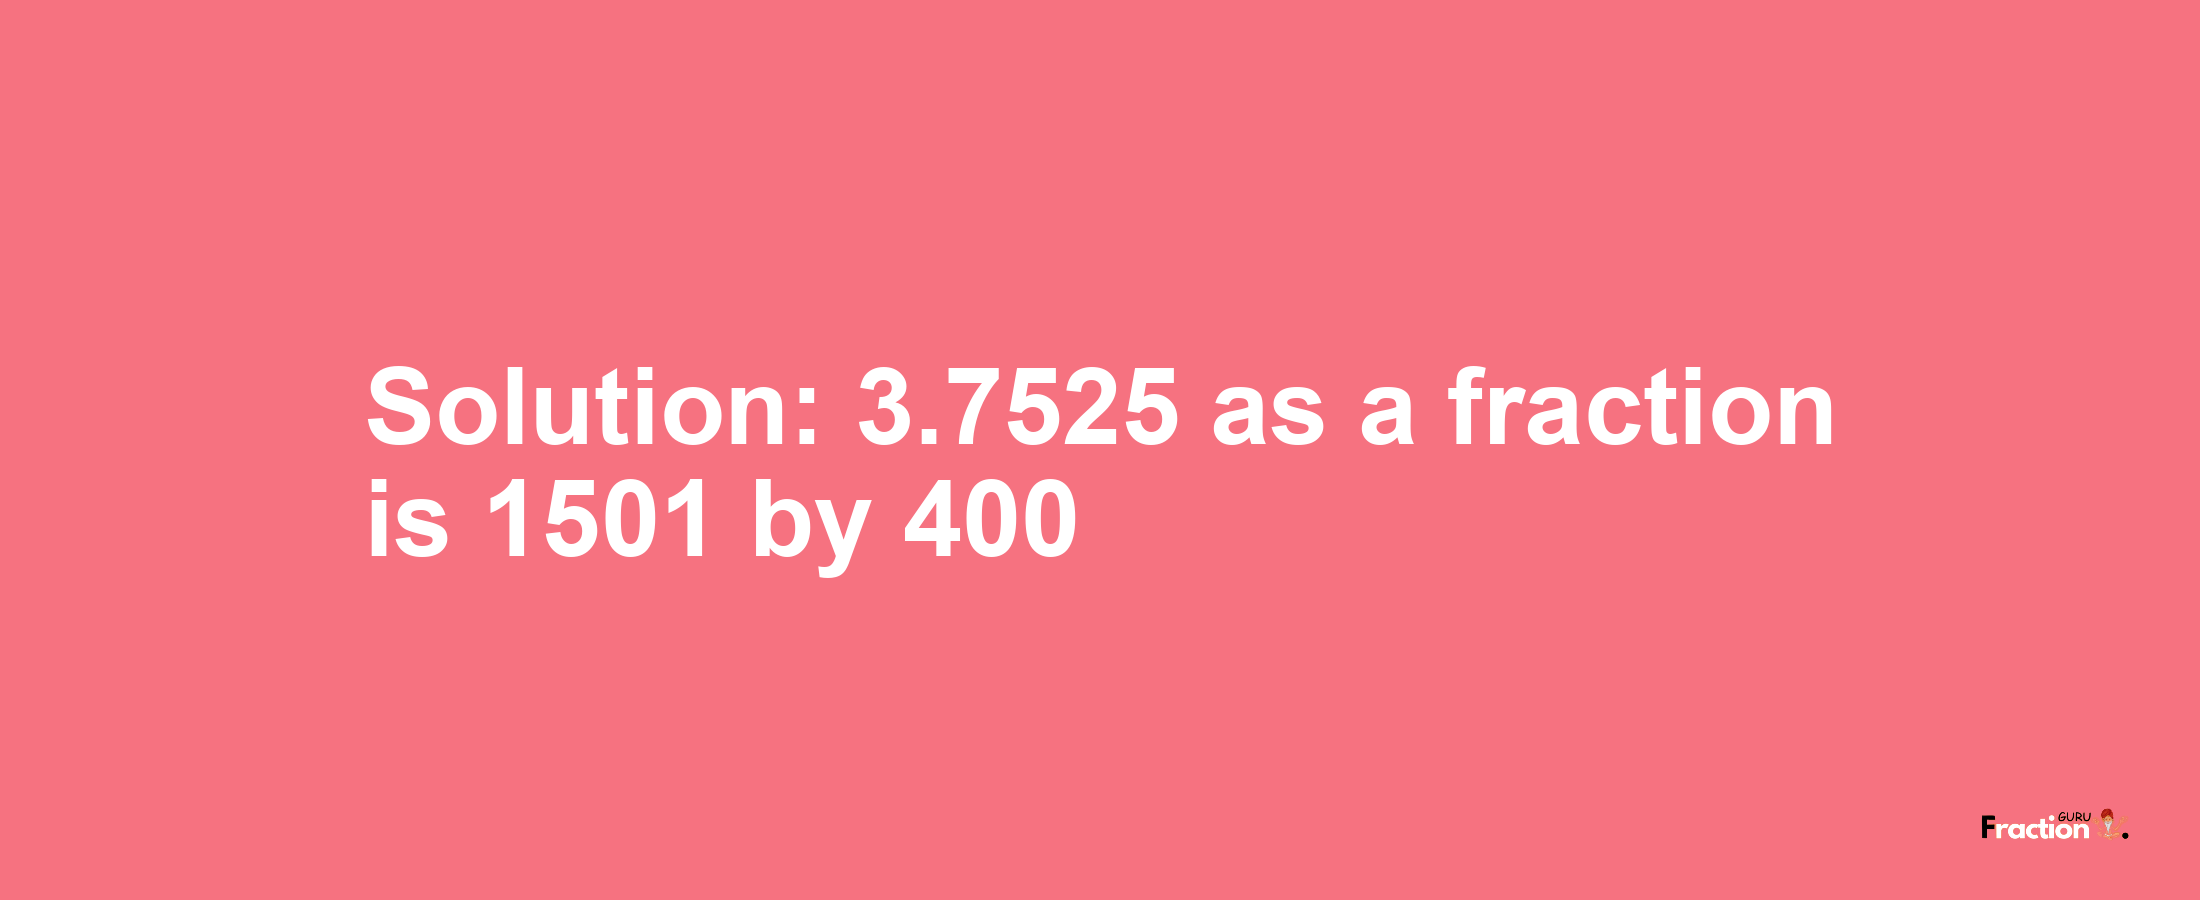 Solution:3.7525 as a fraction is 1501/400